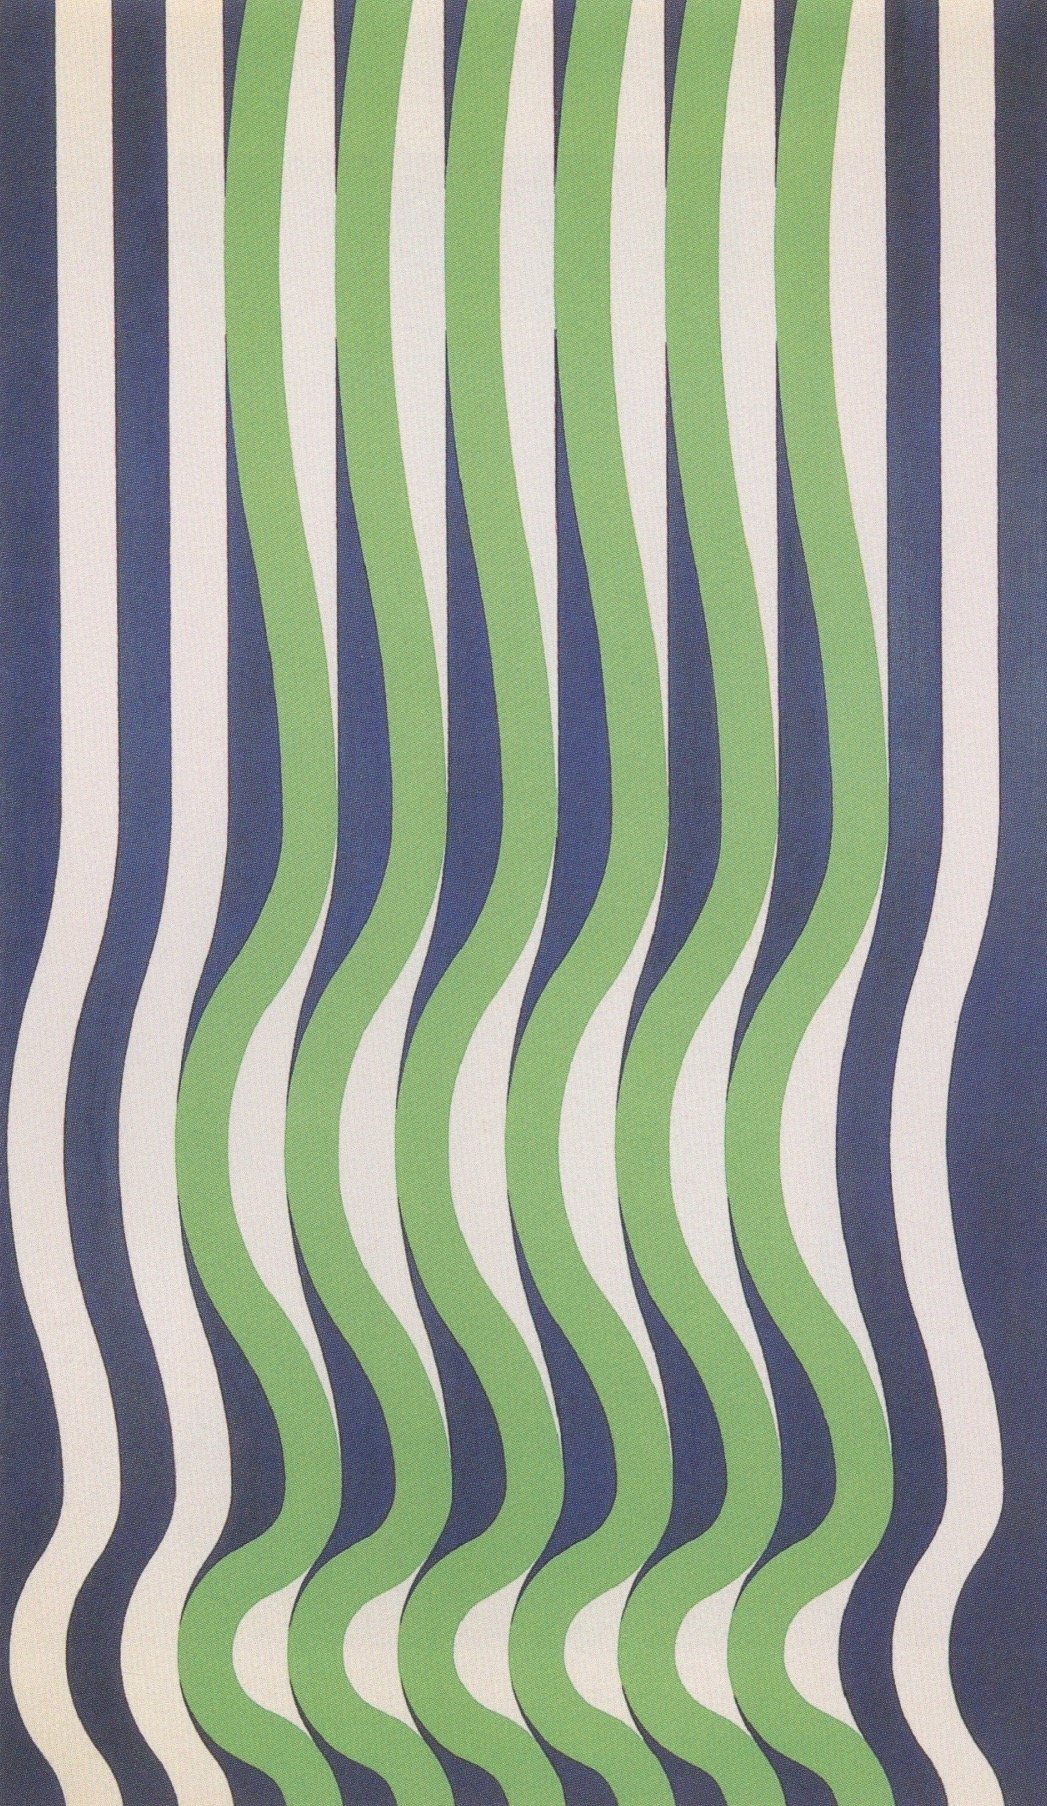 michael kidner, “blue, green and white wave” (1964), oil on canvas, 216 × 132 cm